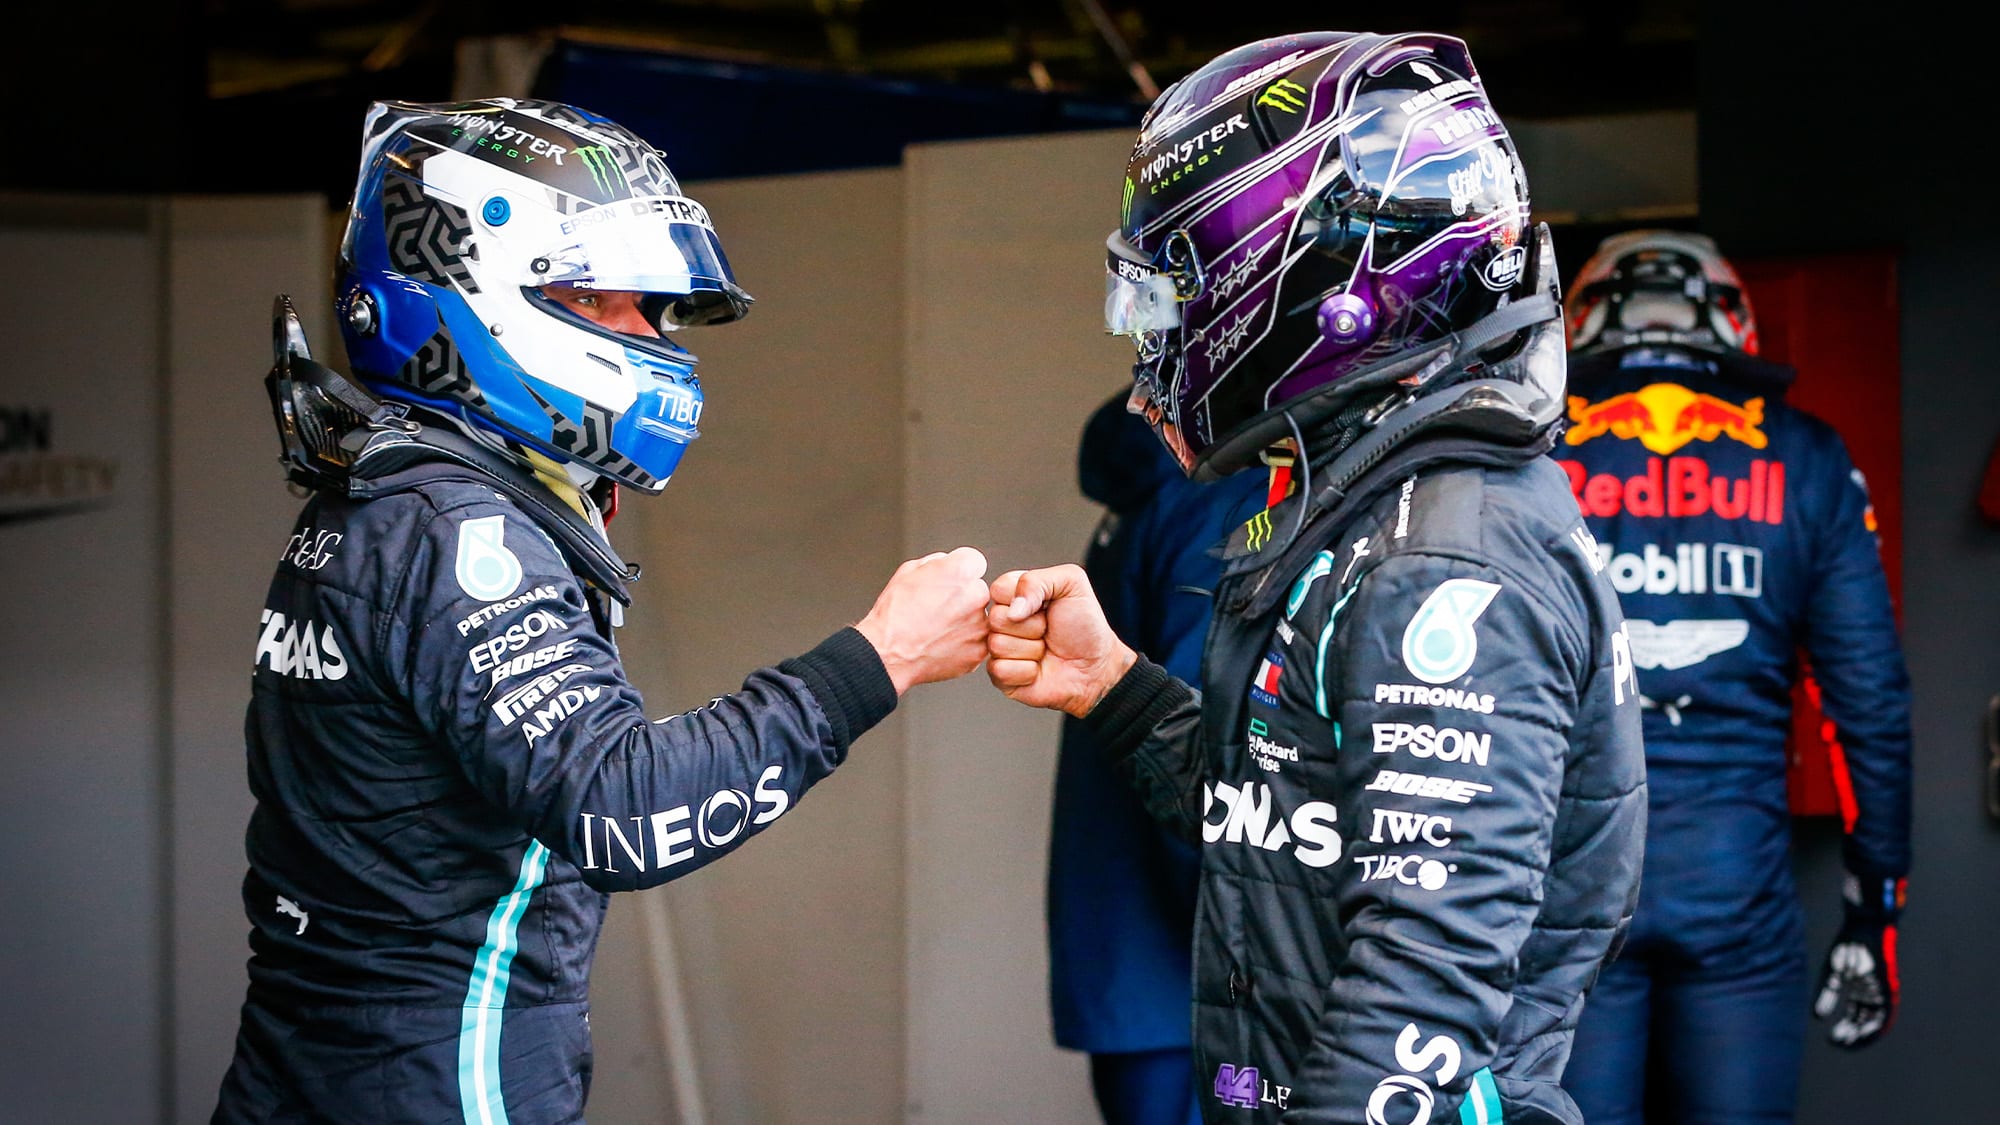 Valtteri Bottas and Lewis Hamilton bump fists after qualifying 1-2 at the Nurburgring for the 2020 F1 Eifel Grand Prix